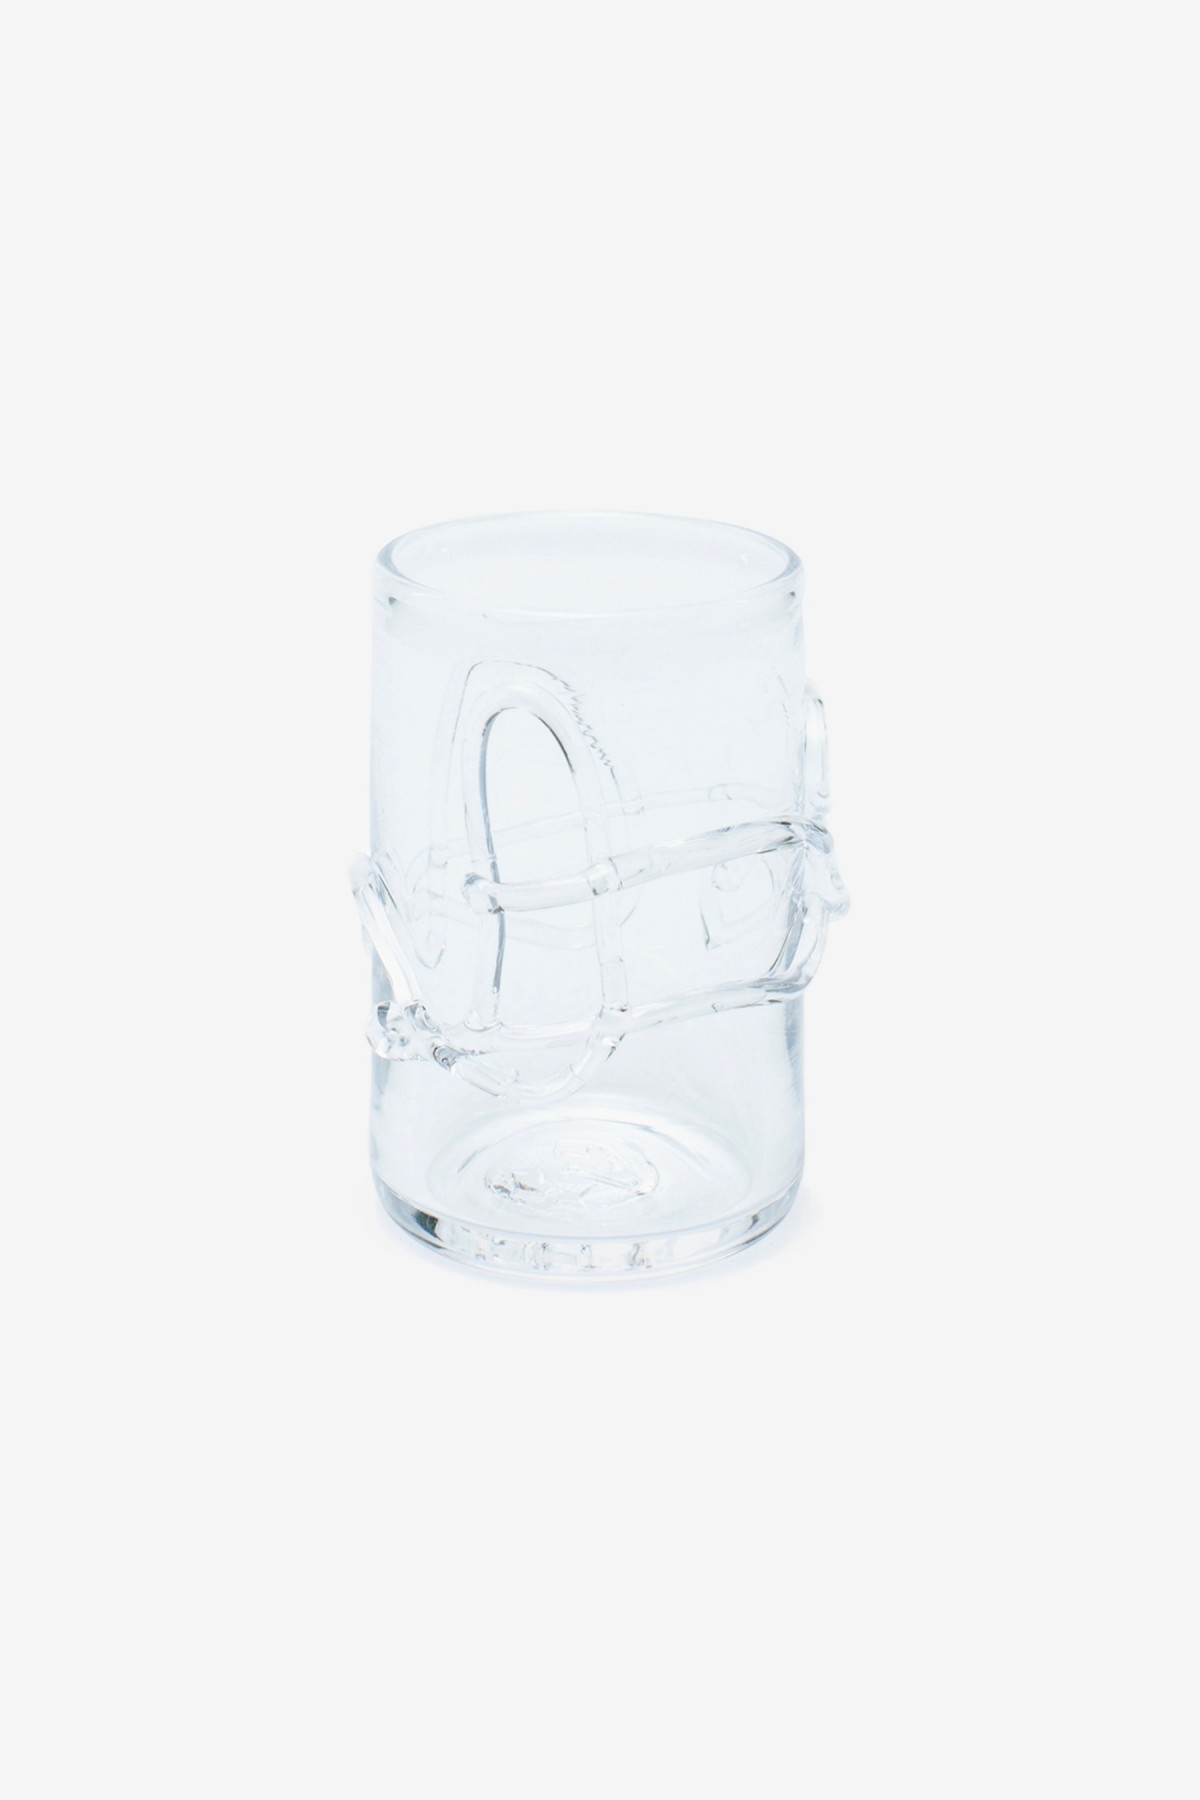 Niko June Ivy Drinking Glass in Clear